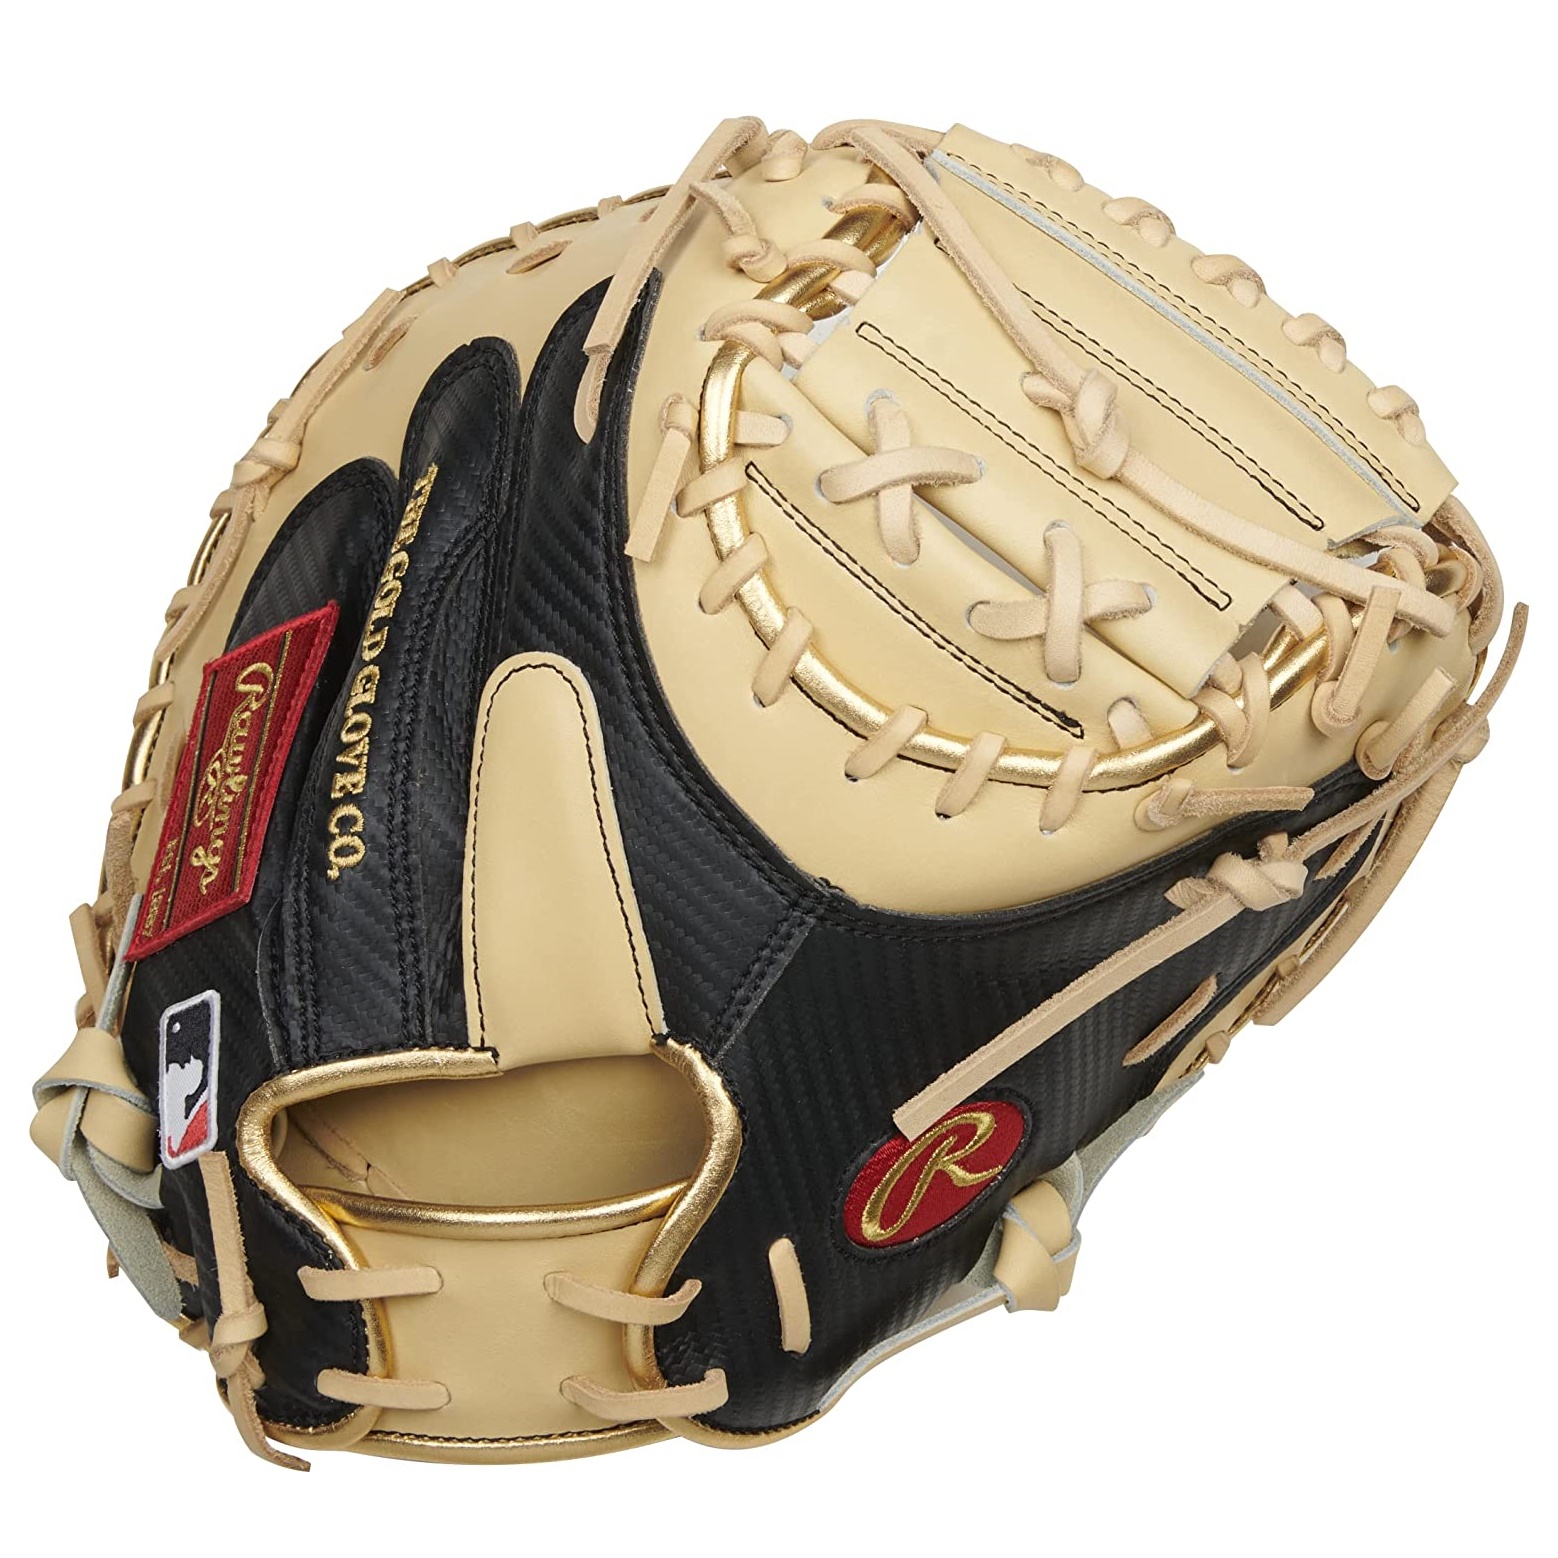 rawlings-heart-of-the-hide-baseball-catchers-mitt-hypershell-34-inch-1-piece-solid-web-right-hand-throw RPROCM4141CCF-RightHandThrow   The Rawlings 34-inch Camel and Black Catchers Mitt is a high-quality